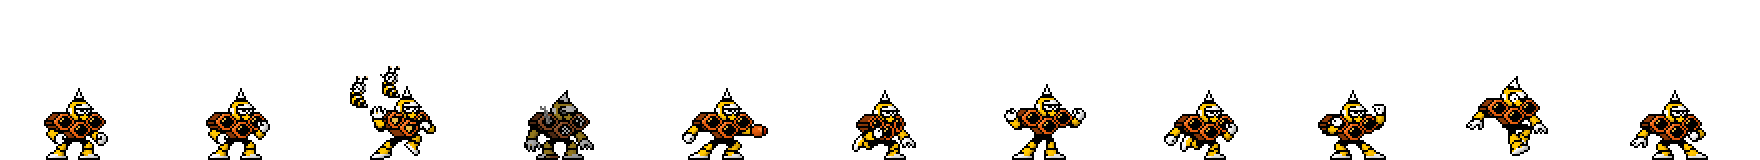 Hornet Man | Base Sprite Right<div style="margin-top: 4px; letting-spacing: 1px; font-size: 90%; font-family: Courier New; color: rgb(159, 150, 172);">[robot:right:base]{hornet-man}</div>